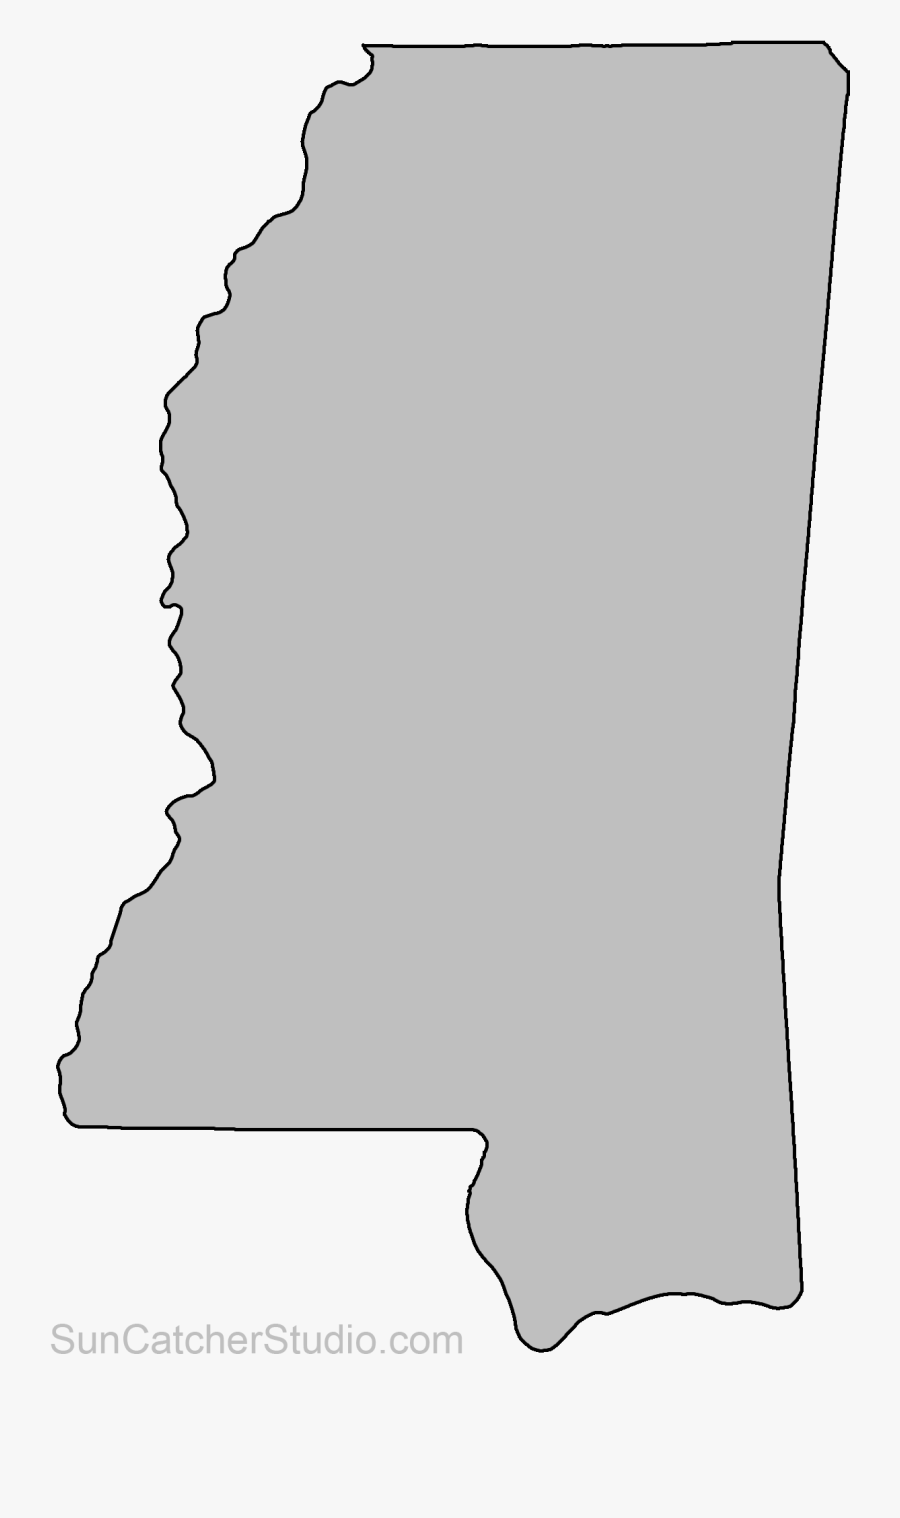 State Of Mississippi Png, Transparent Clipart